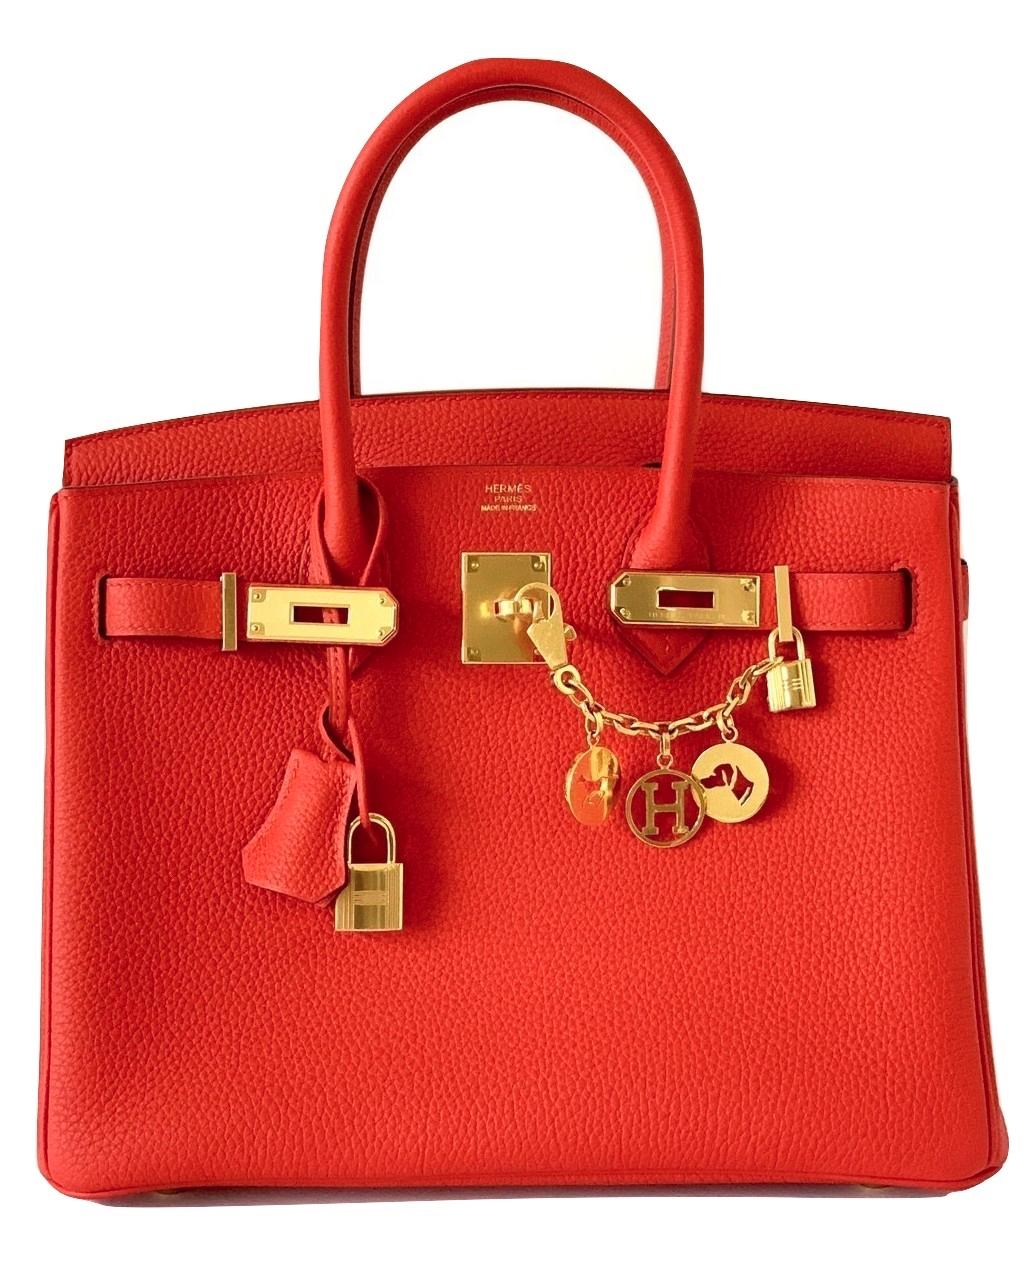 Hermes 30cm Birkin
Roug de Coeur, the hottest new Red from Hermes just released
Gold Hardware
Togo Leather
Collection: D
The Breloque charms are not included in this auction!
Never worn, brand new, plastic on the hardware
Hermes Box, Dustcover, Lock